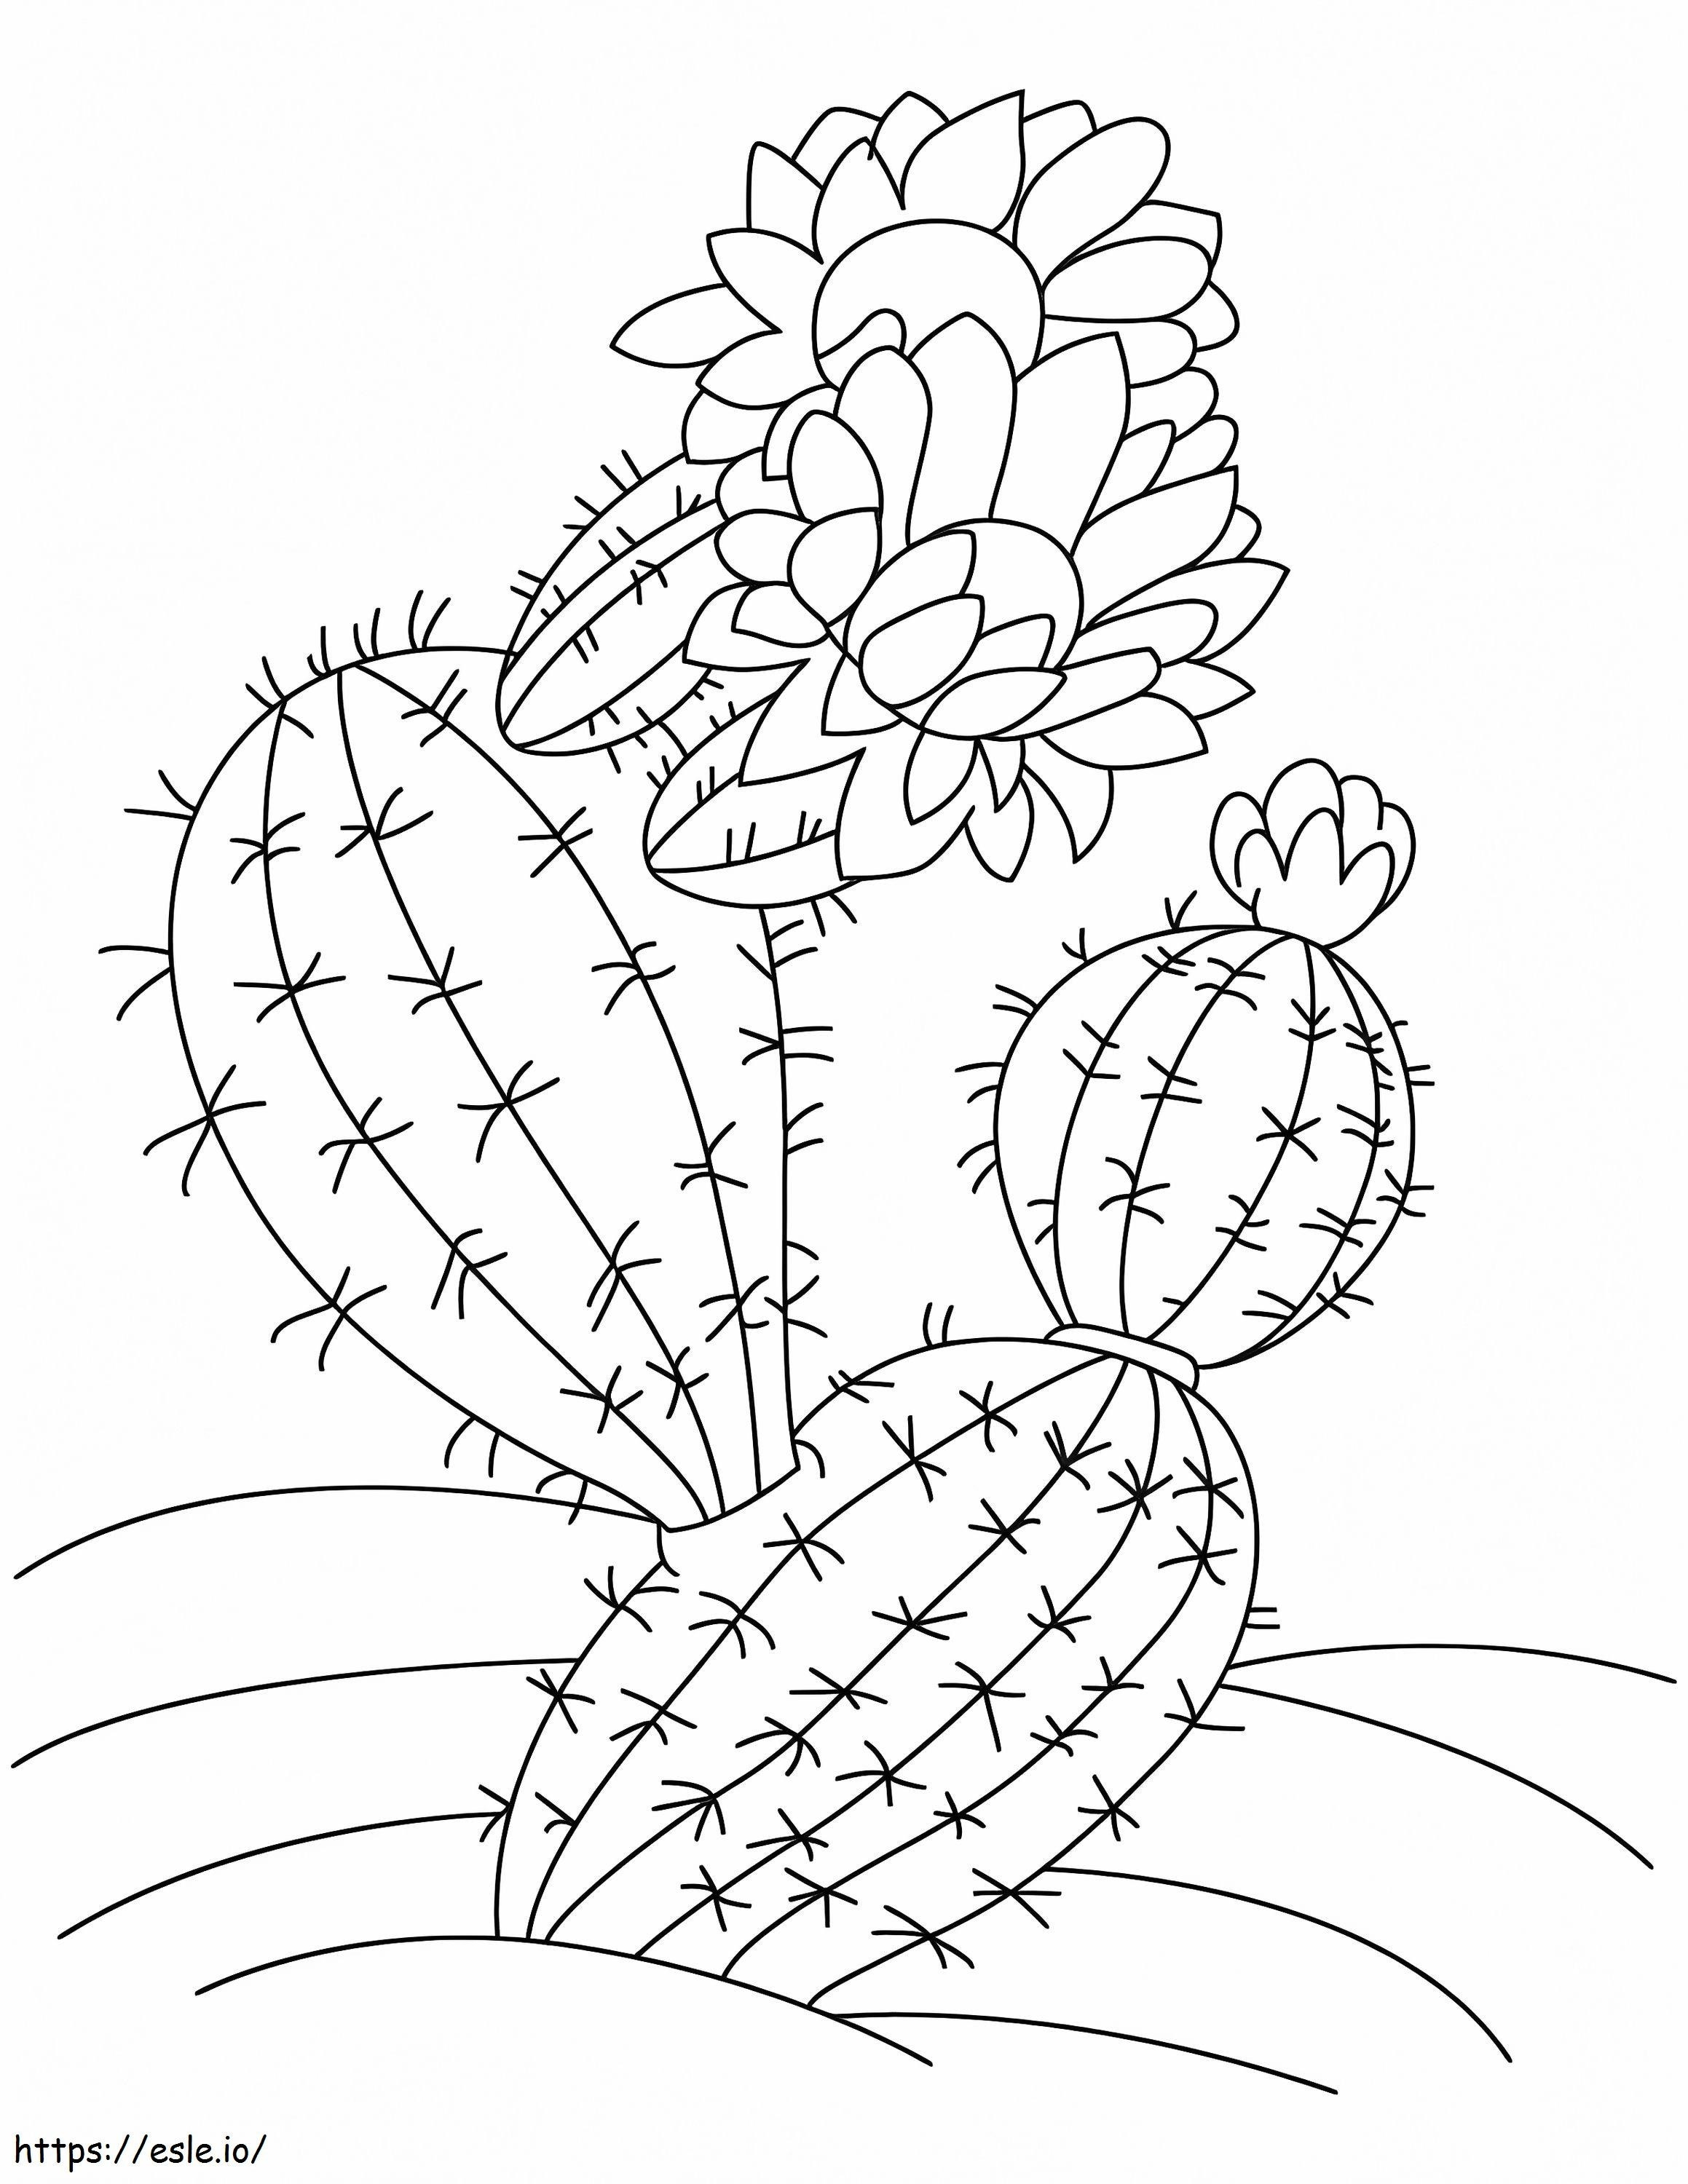 Cactus With Flower coloring page